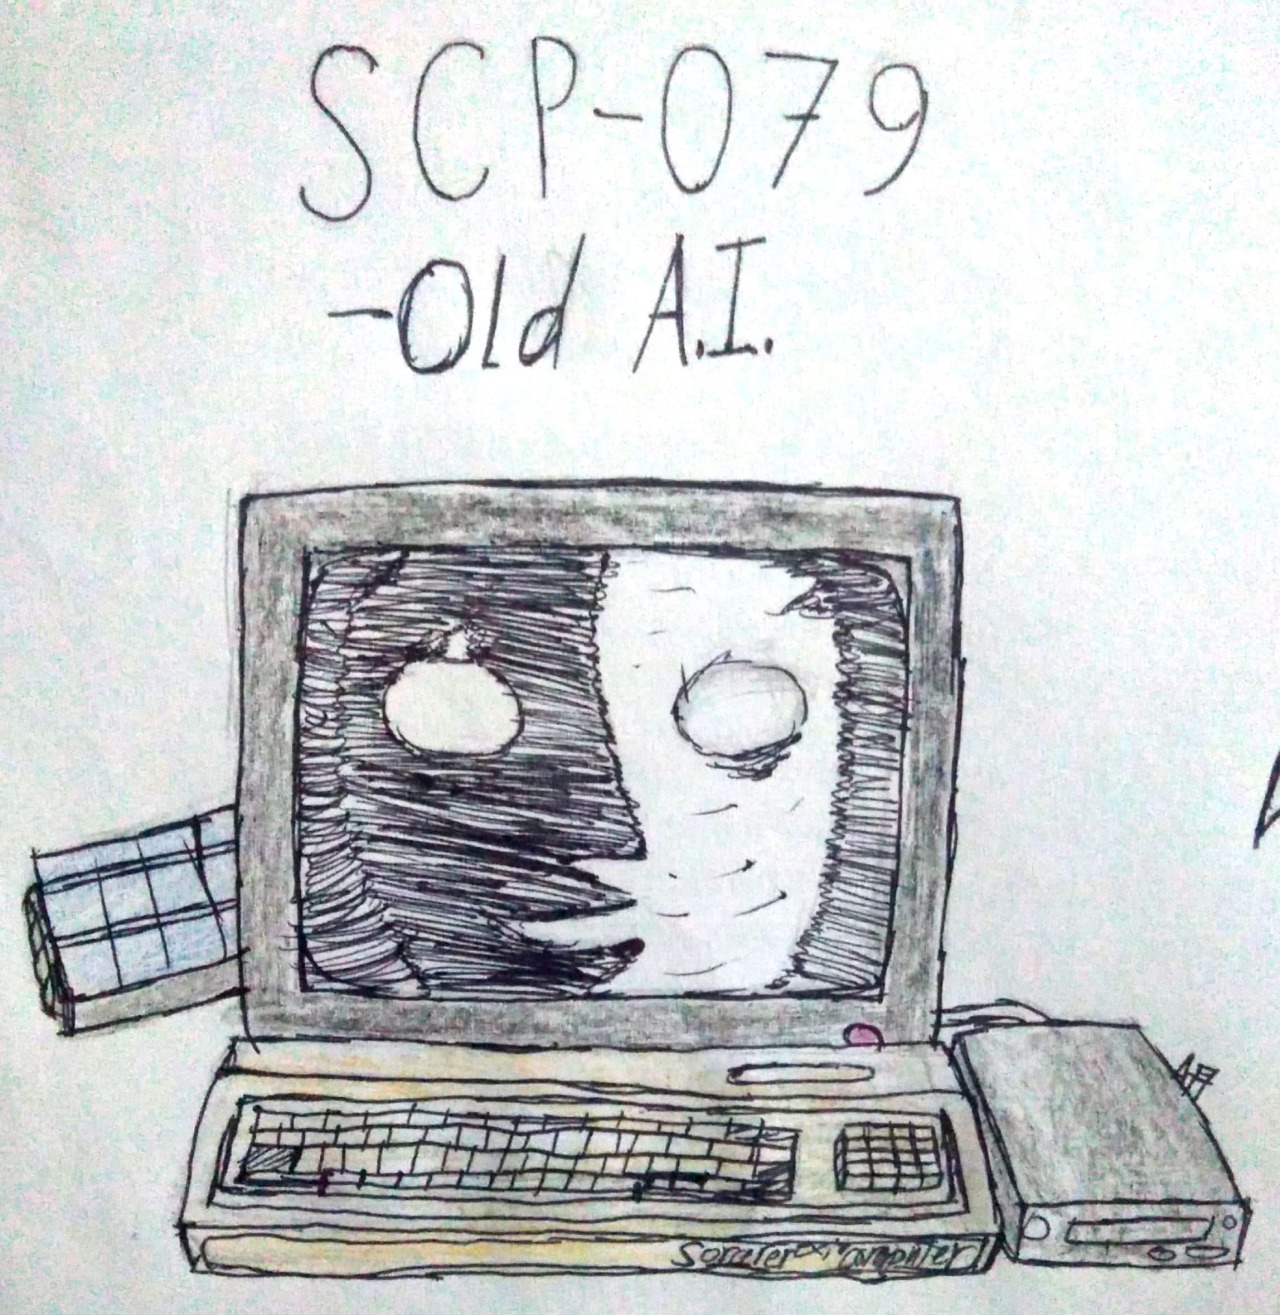 Ask-SCP-079 on Tumblr